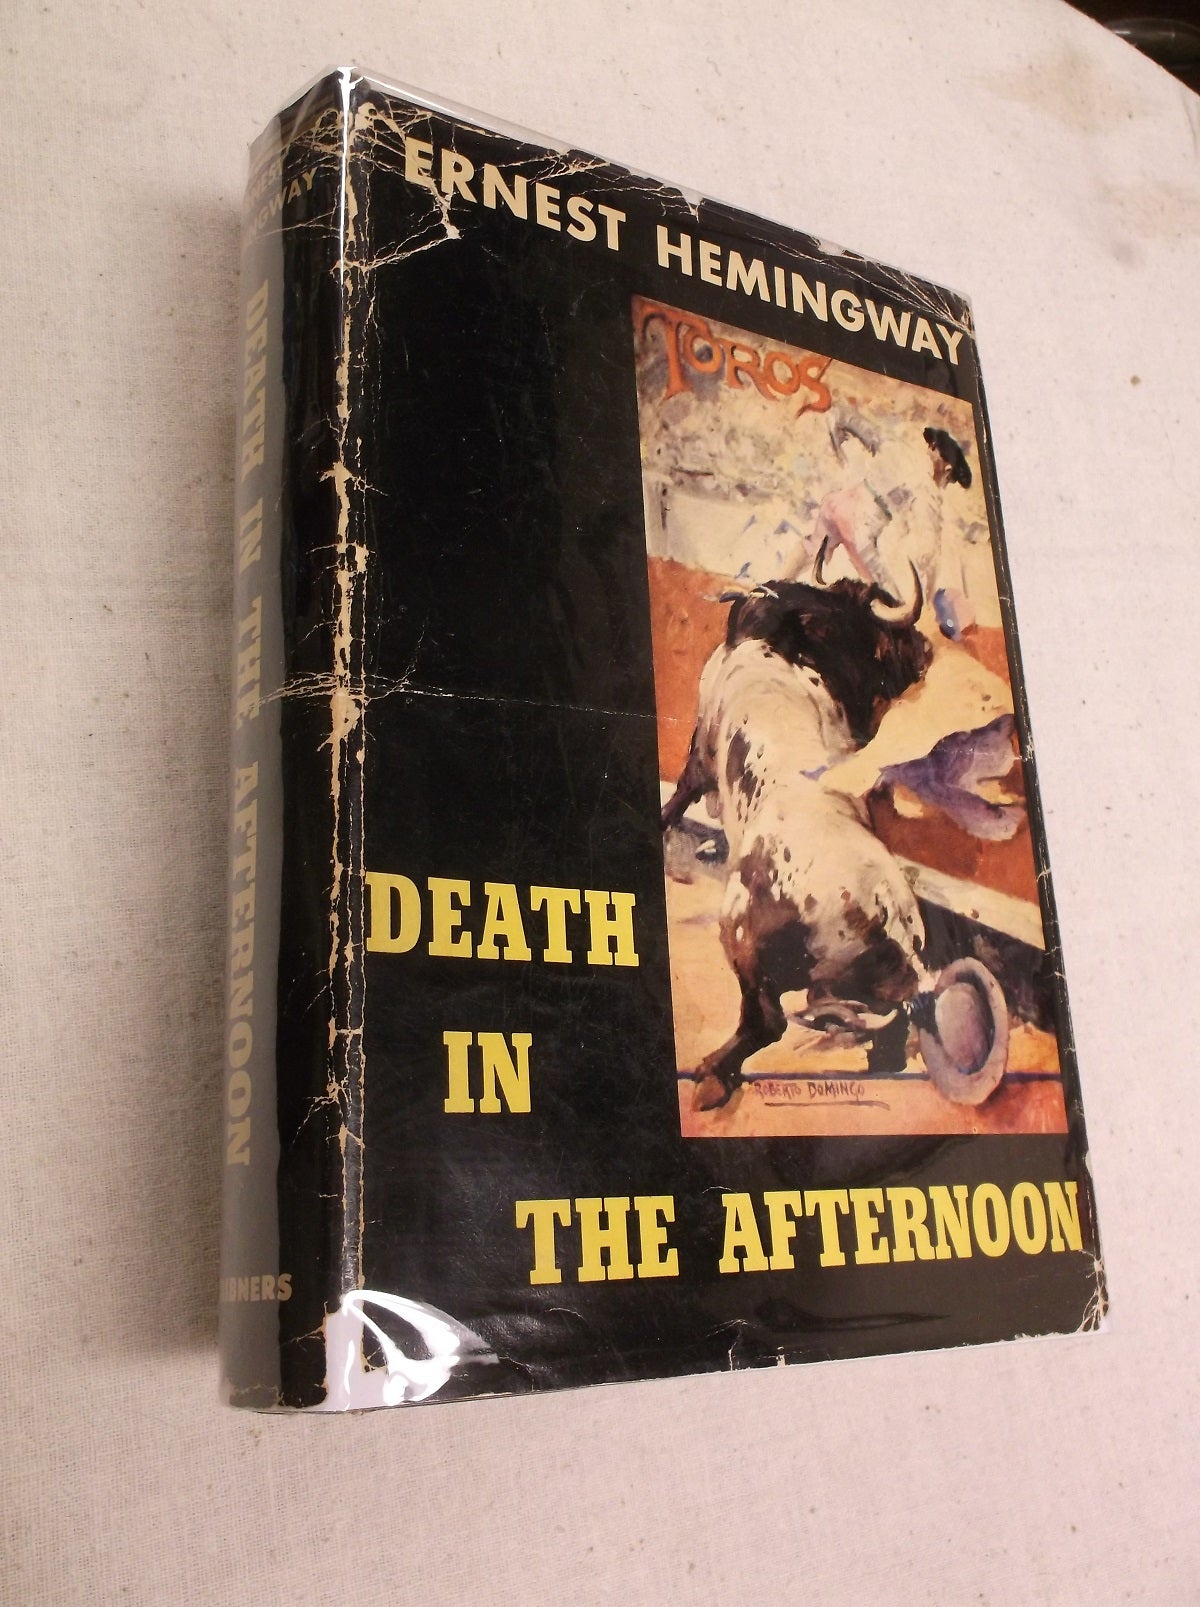 Death in the Afternoon | Ernest Hemingway